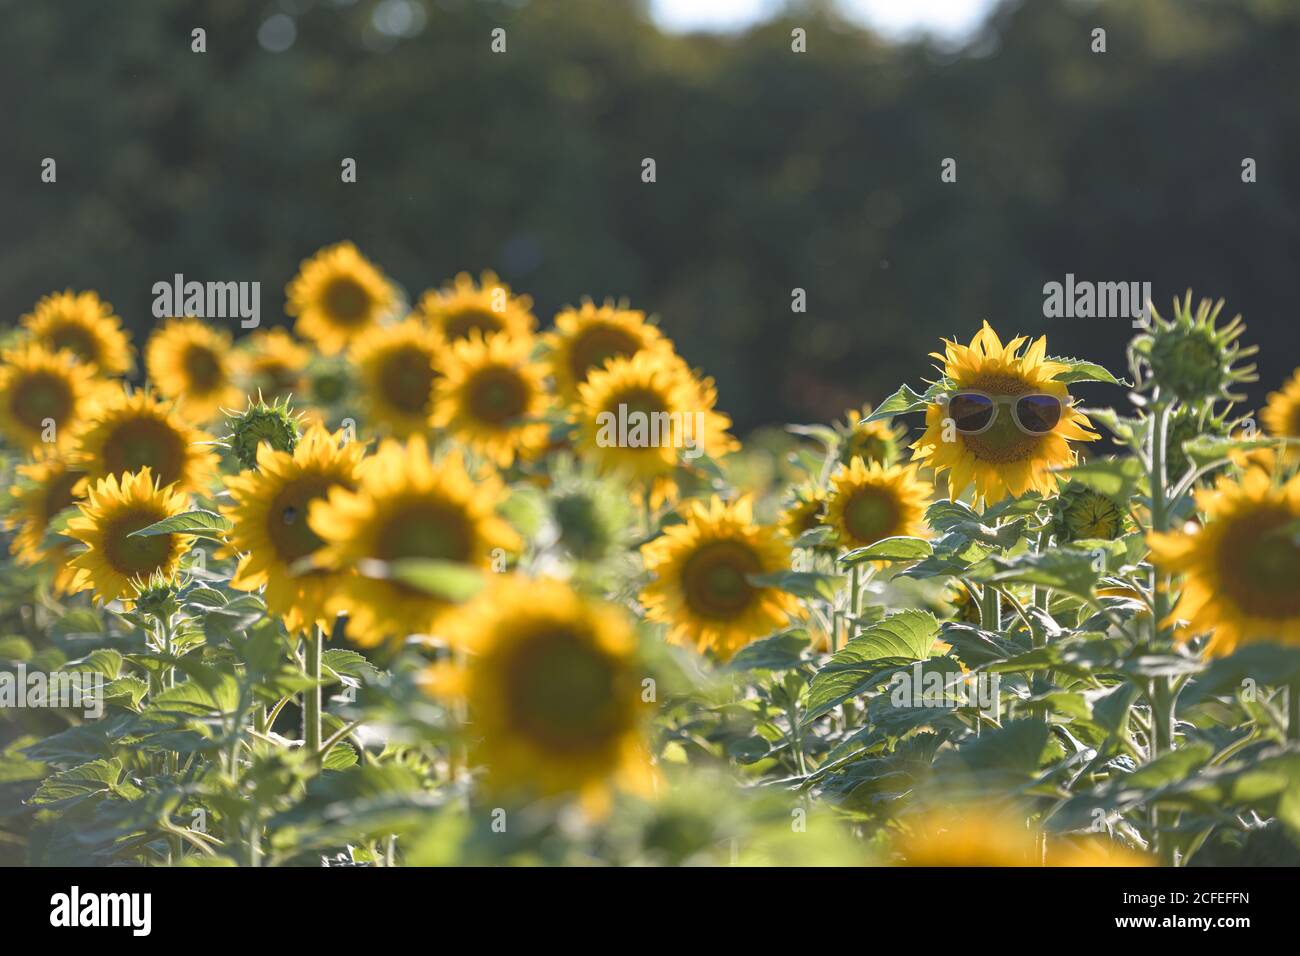 Field with blooming sunflowers grown in a row-eoin sunflower head wearing sunglasses Stock Photo